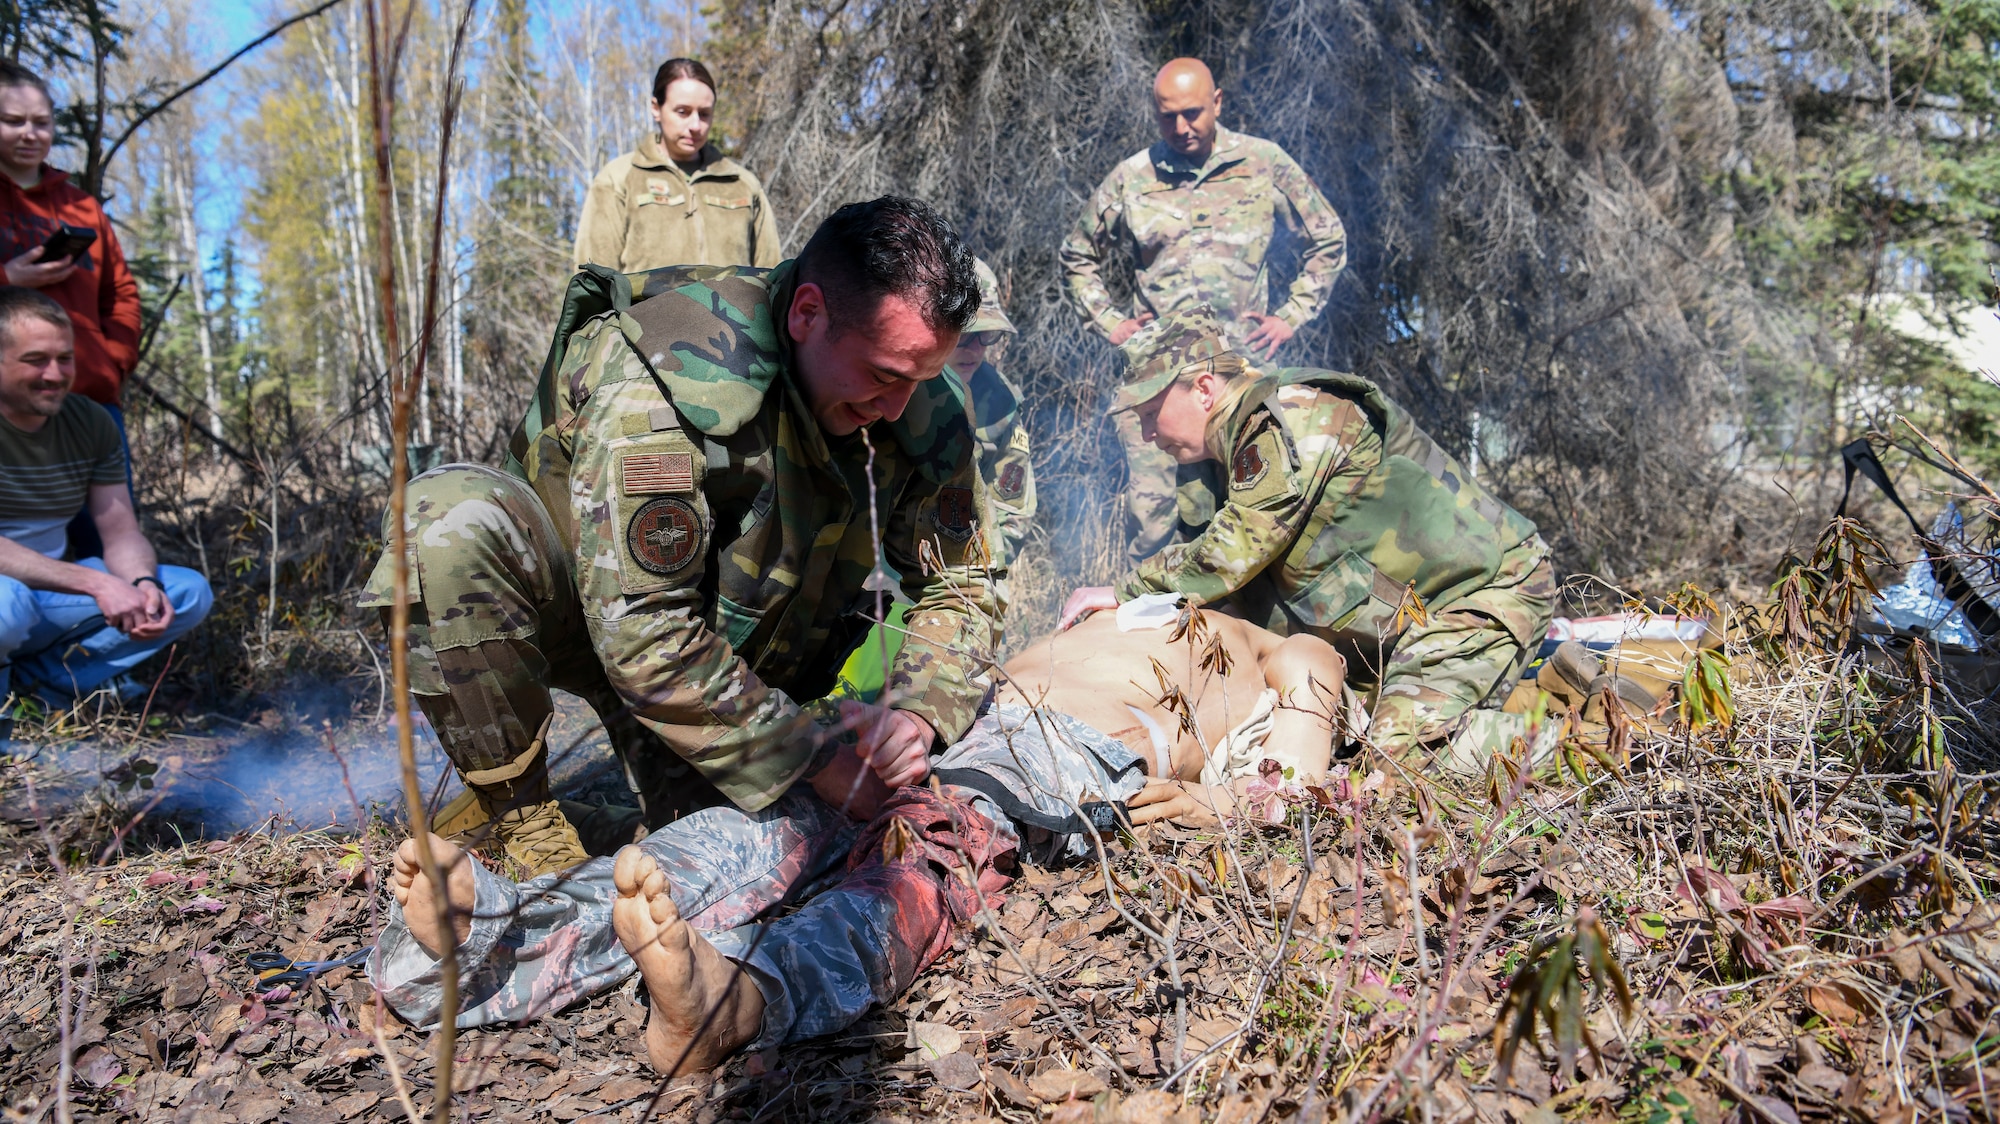 N.Y. Air National Guard airmen from the 106th Rescue Wing, Westhampton Beach, N.Y., treat a “patient,” an advanced medical simulation dummy, at Joint Base Elmendorf-Richardson in Anchorage, Alaska, May 5, 2022. The combat medics of the 106th Medical Group participated in their first Military Facility Annual Training since the start of the COVID-19 pandemic, and were expected to encounter a patient, assess the injuries, mitigate the risk, stop bleeding, treat secondary wounds, and/or resuscitate the patient and maintain the airway. (Air National Guard photo by SSgt Daniel H. Farrell)